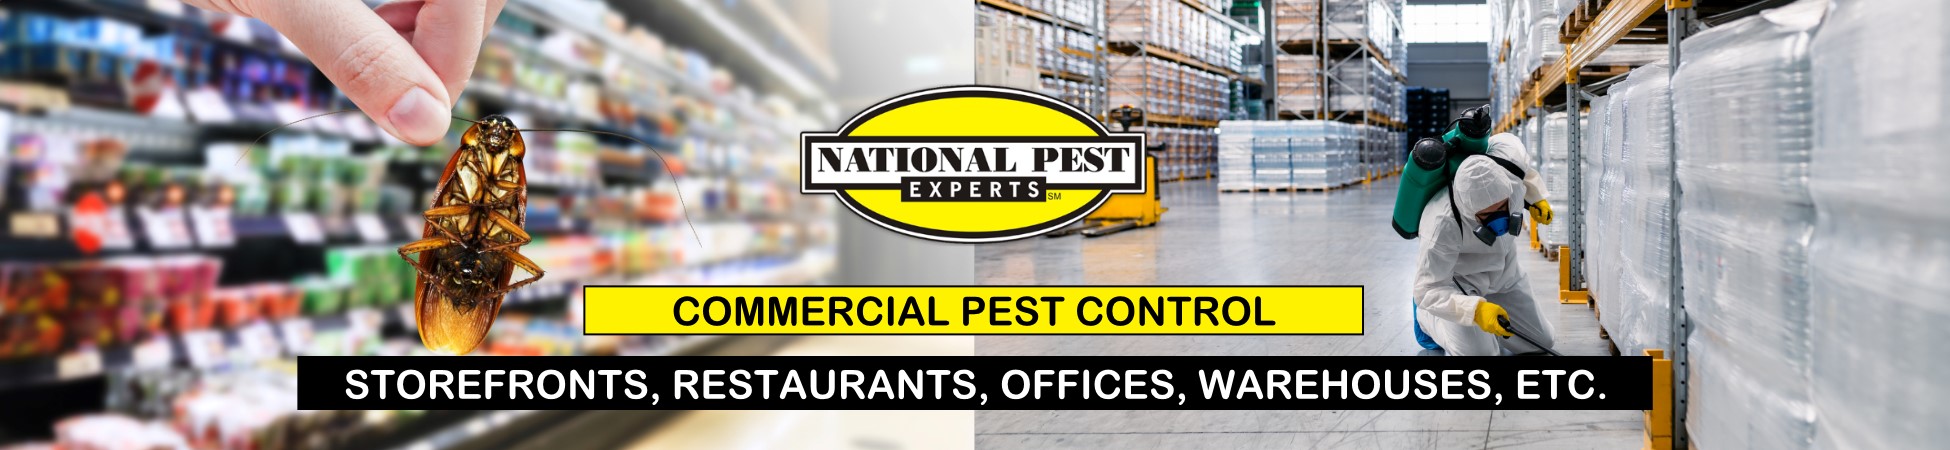 National Pest Experts - Commercial & Industrial exterminating and pest control in Syosset, NY